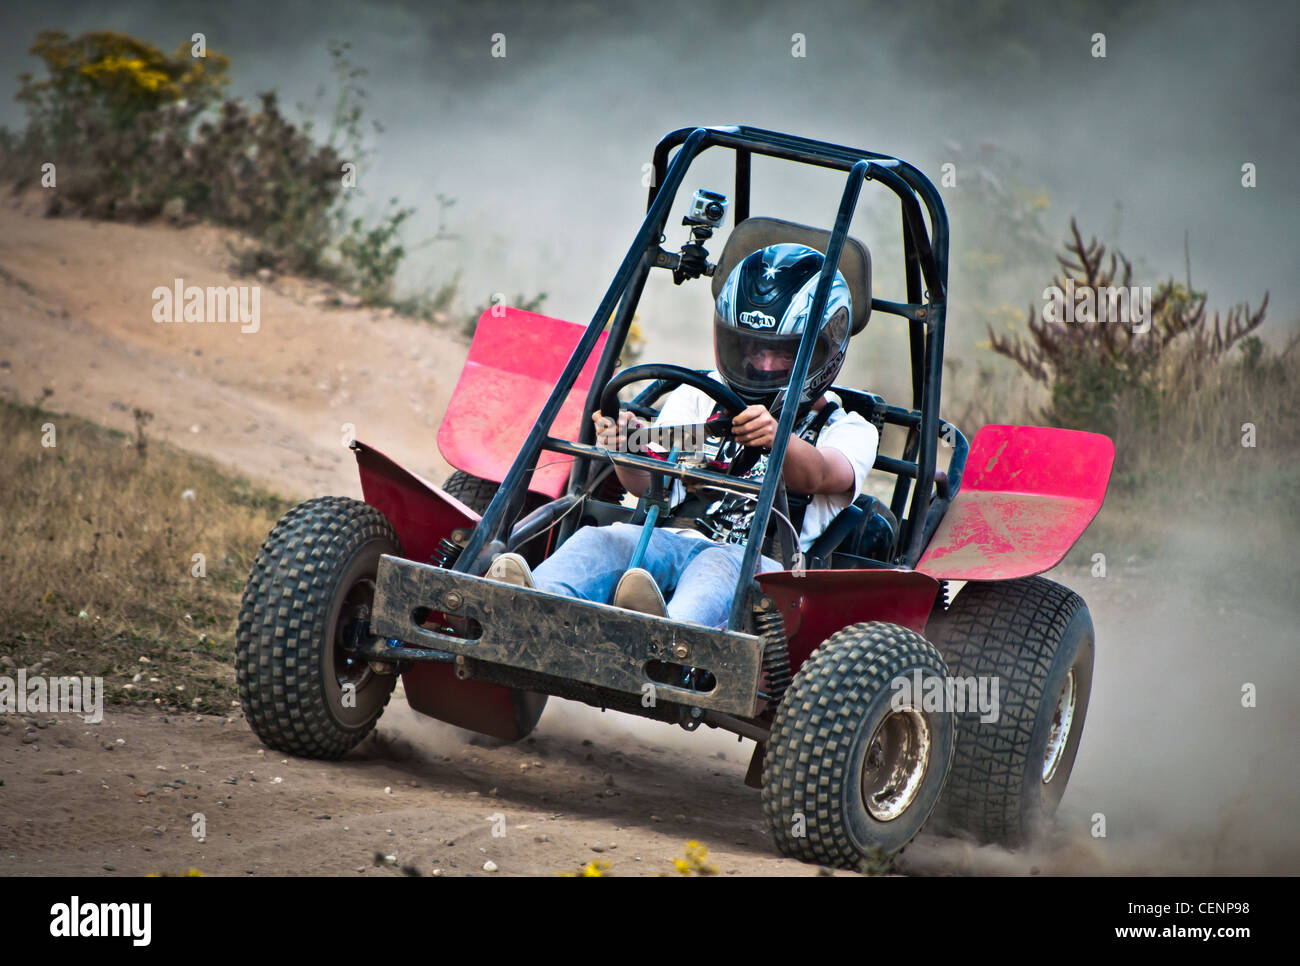 Dirt buggy in action in dusty conditions Nottinghamshire Stock Photo